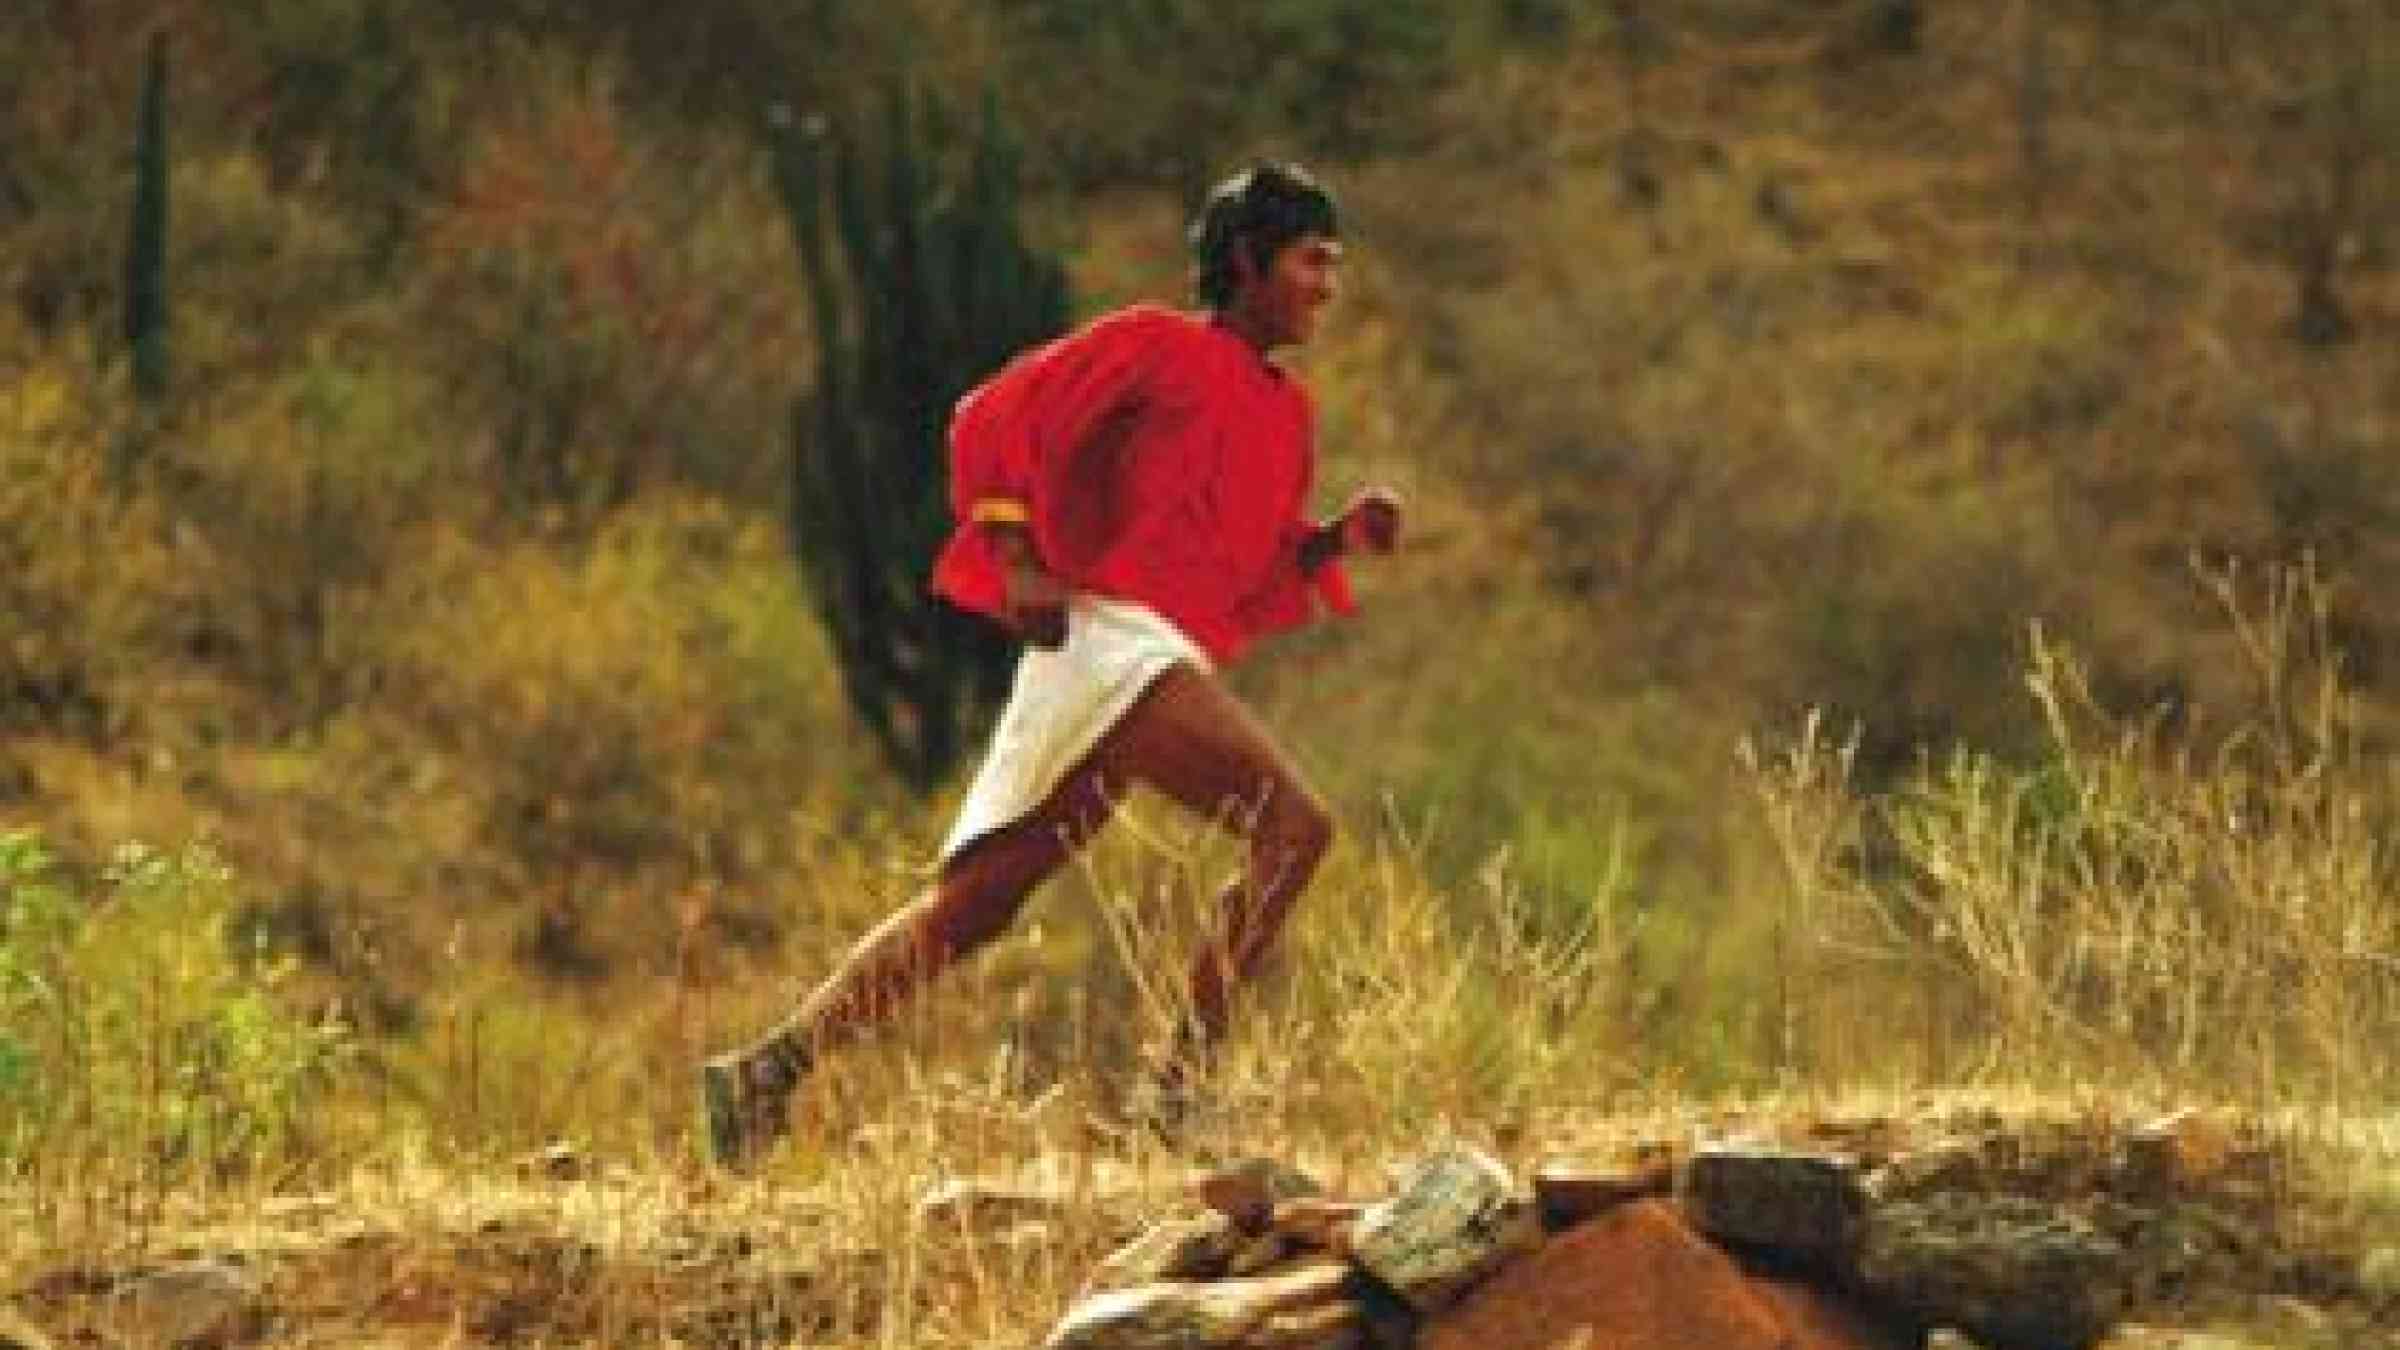 When it comes to going ultra-distances, nothing could beat the Tarahumara – not a racehorse, not a cheetah, not an Olympic marathoner.